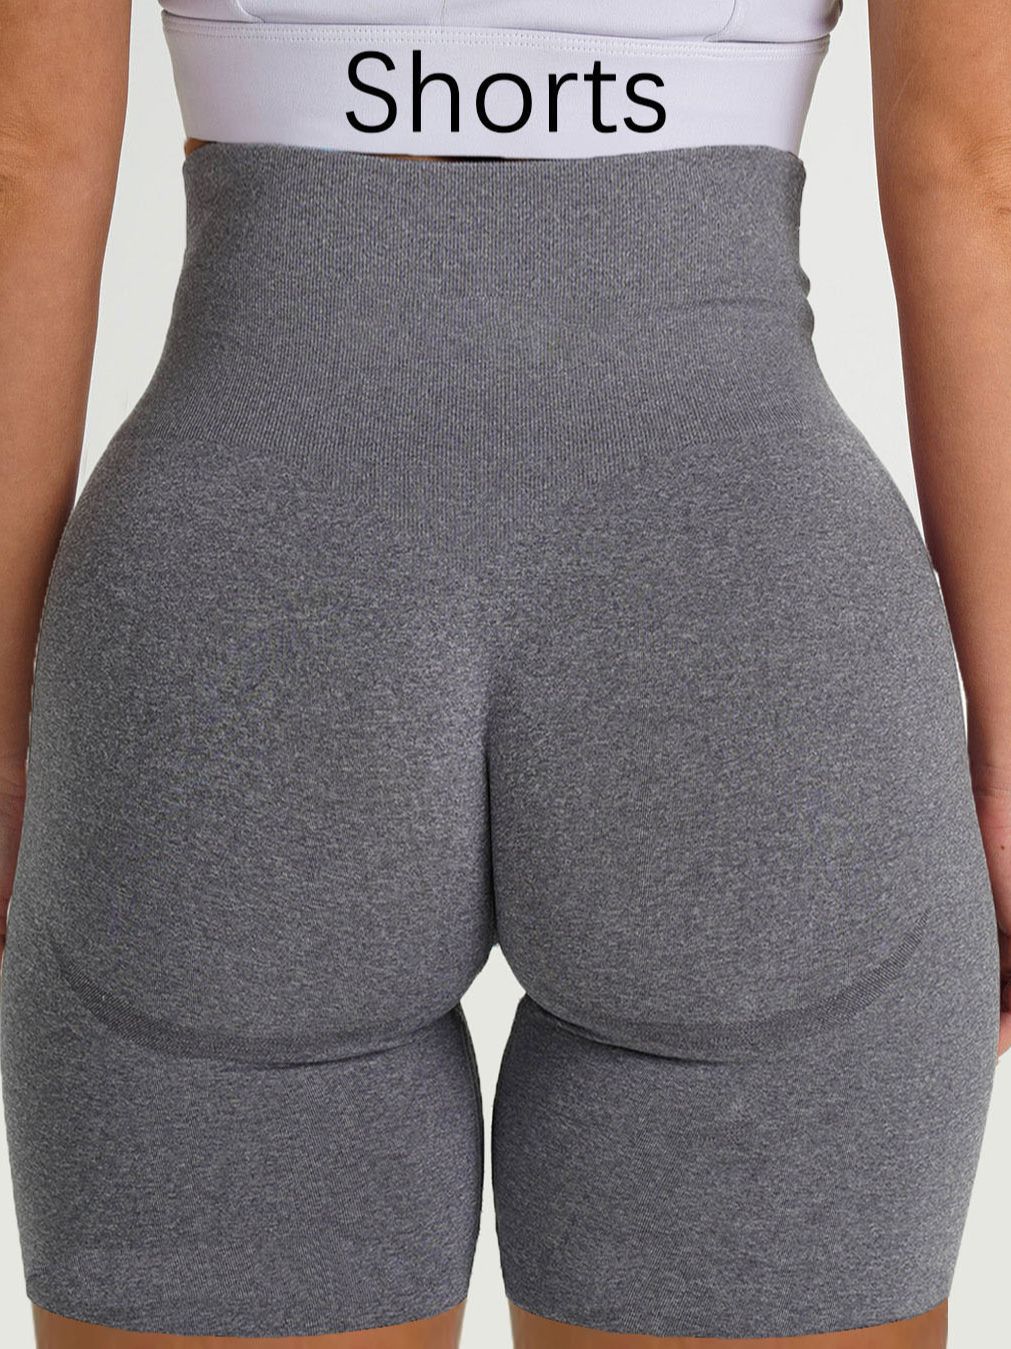 Seamless Leggings: High-Waisted Sport Shorts for Women, Fitness Tights, Trendy Gym Pants